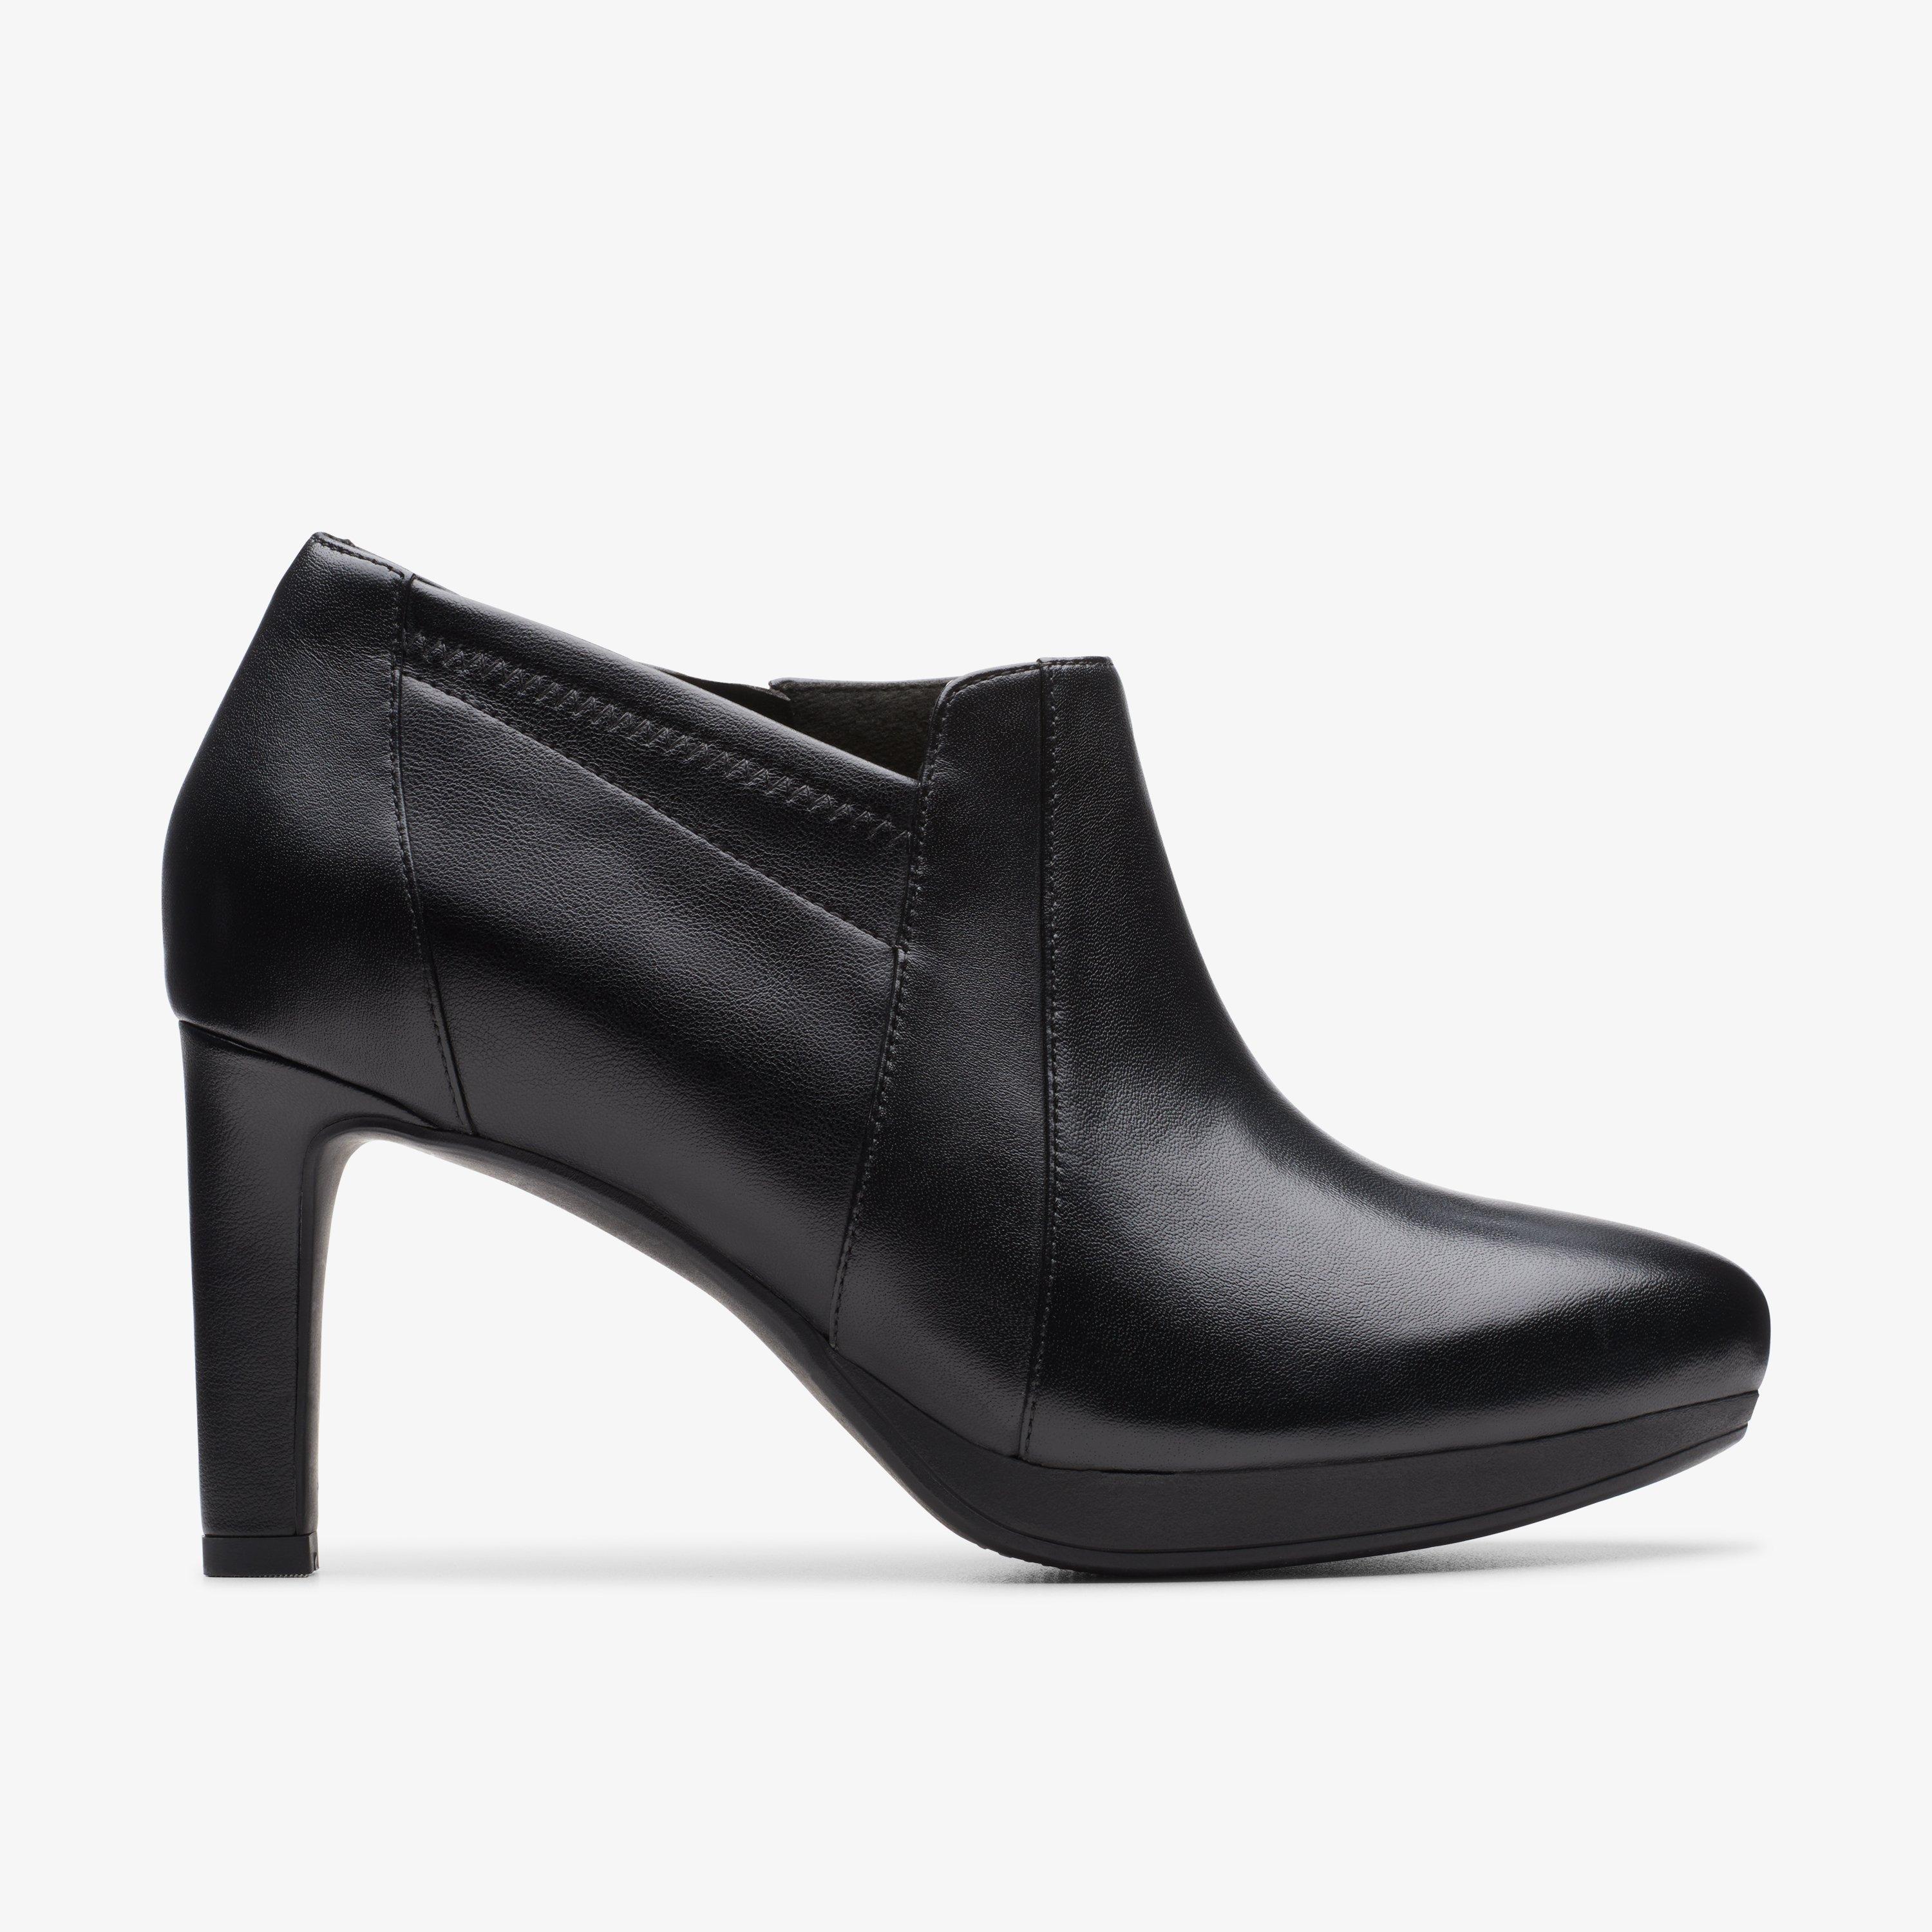 WOMENS Ambyr Hope Black Leather Ankle Boots | Clarks US